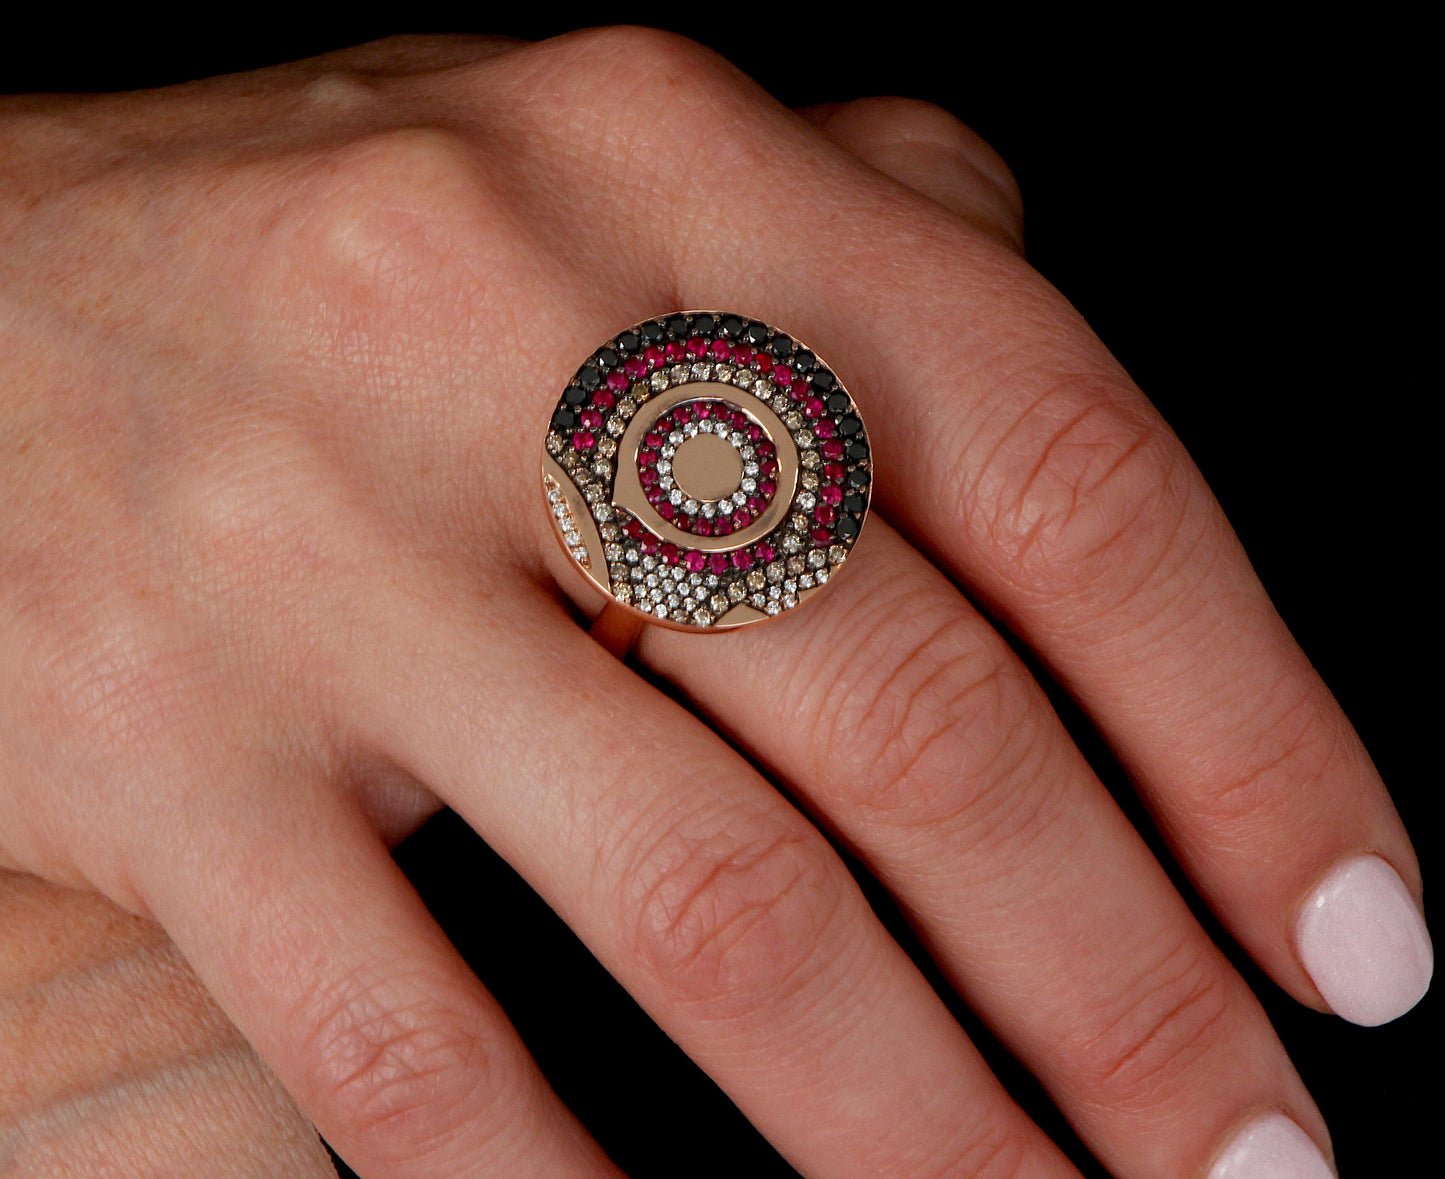 One of a Kind. Dot Ring with Ruby and Diamonds